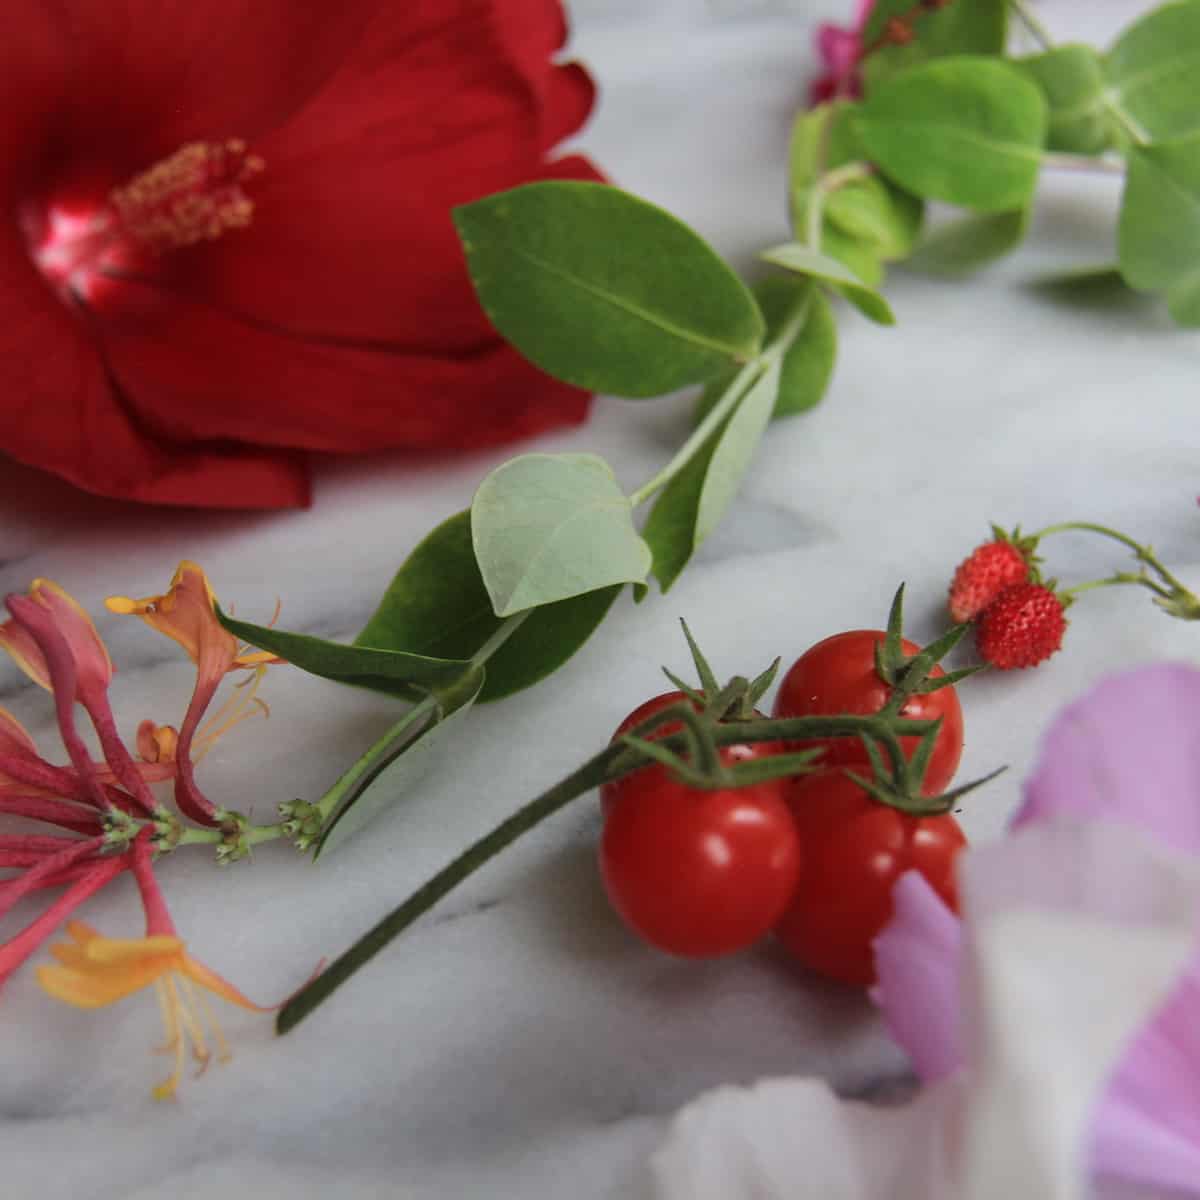 Cherry tomatoes on the vine beside flowers from the garden on marble countertop